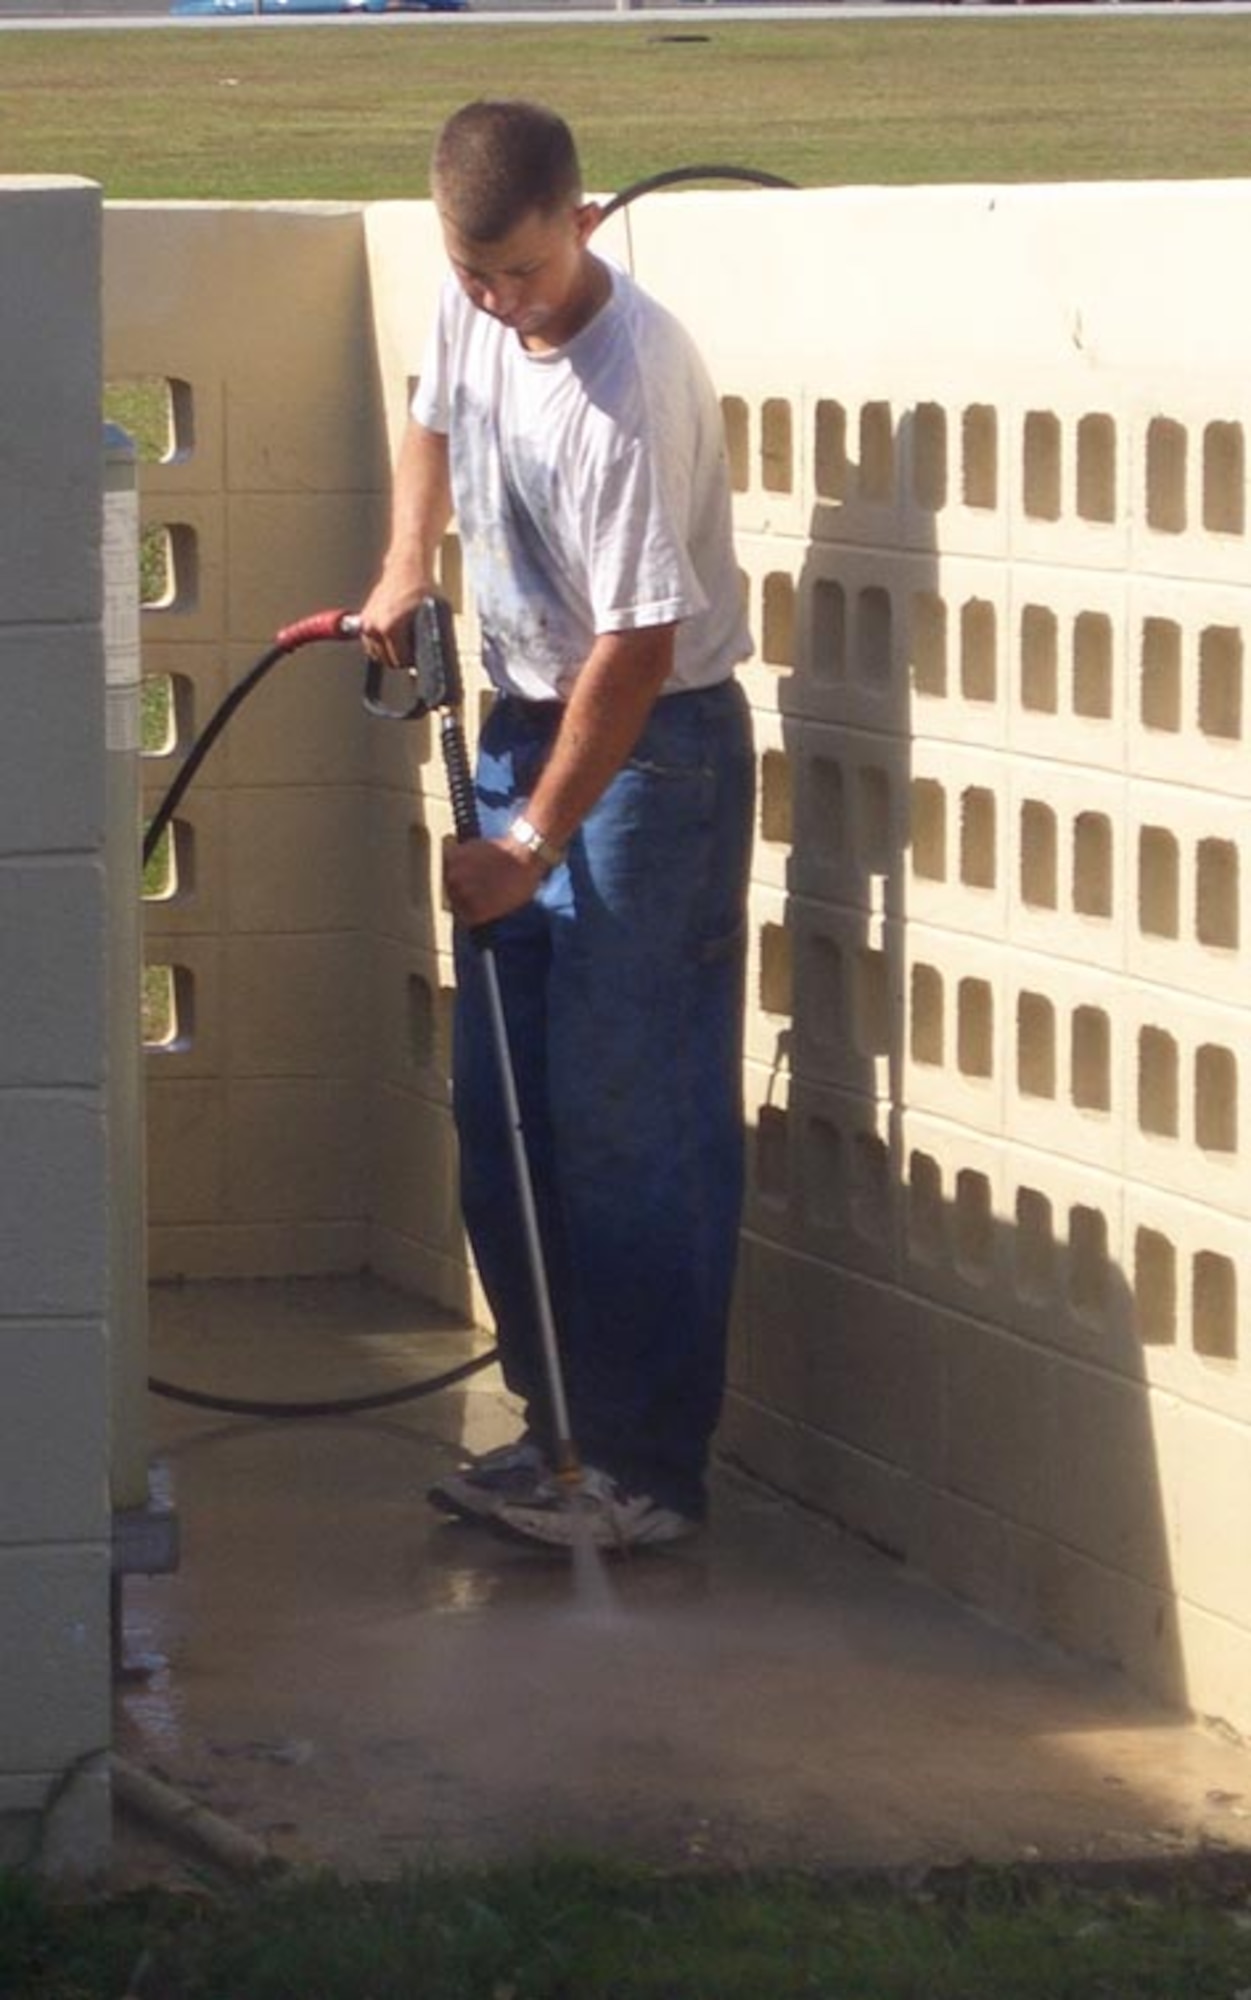 Airman 1st Class John Loker, 36th Logistics Readiness Squadron, volunteers after class to power wash the FTAC building. (Courtesy photo)